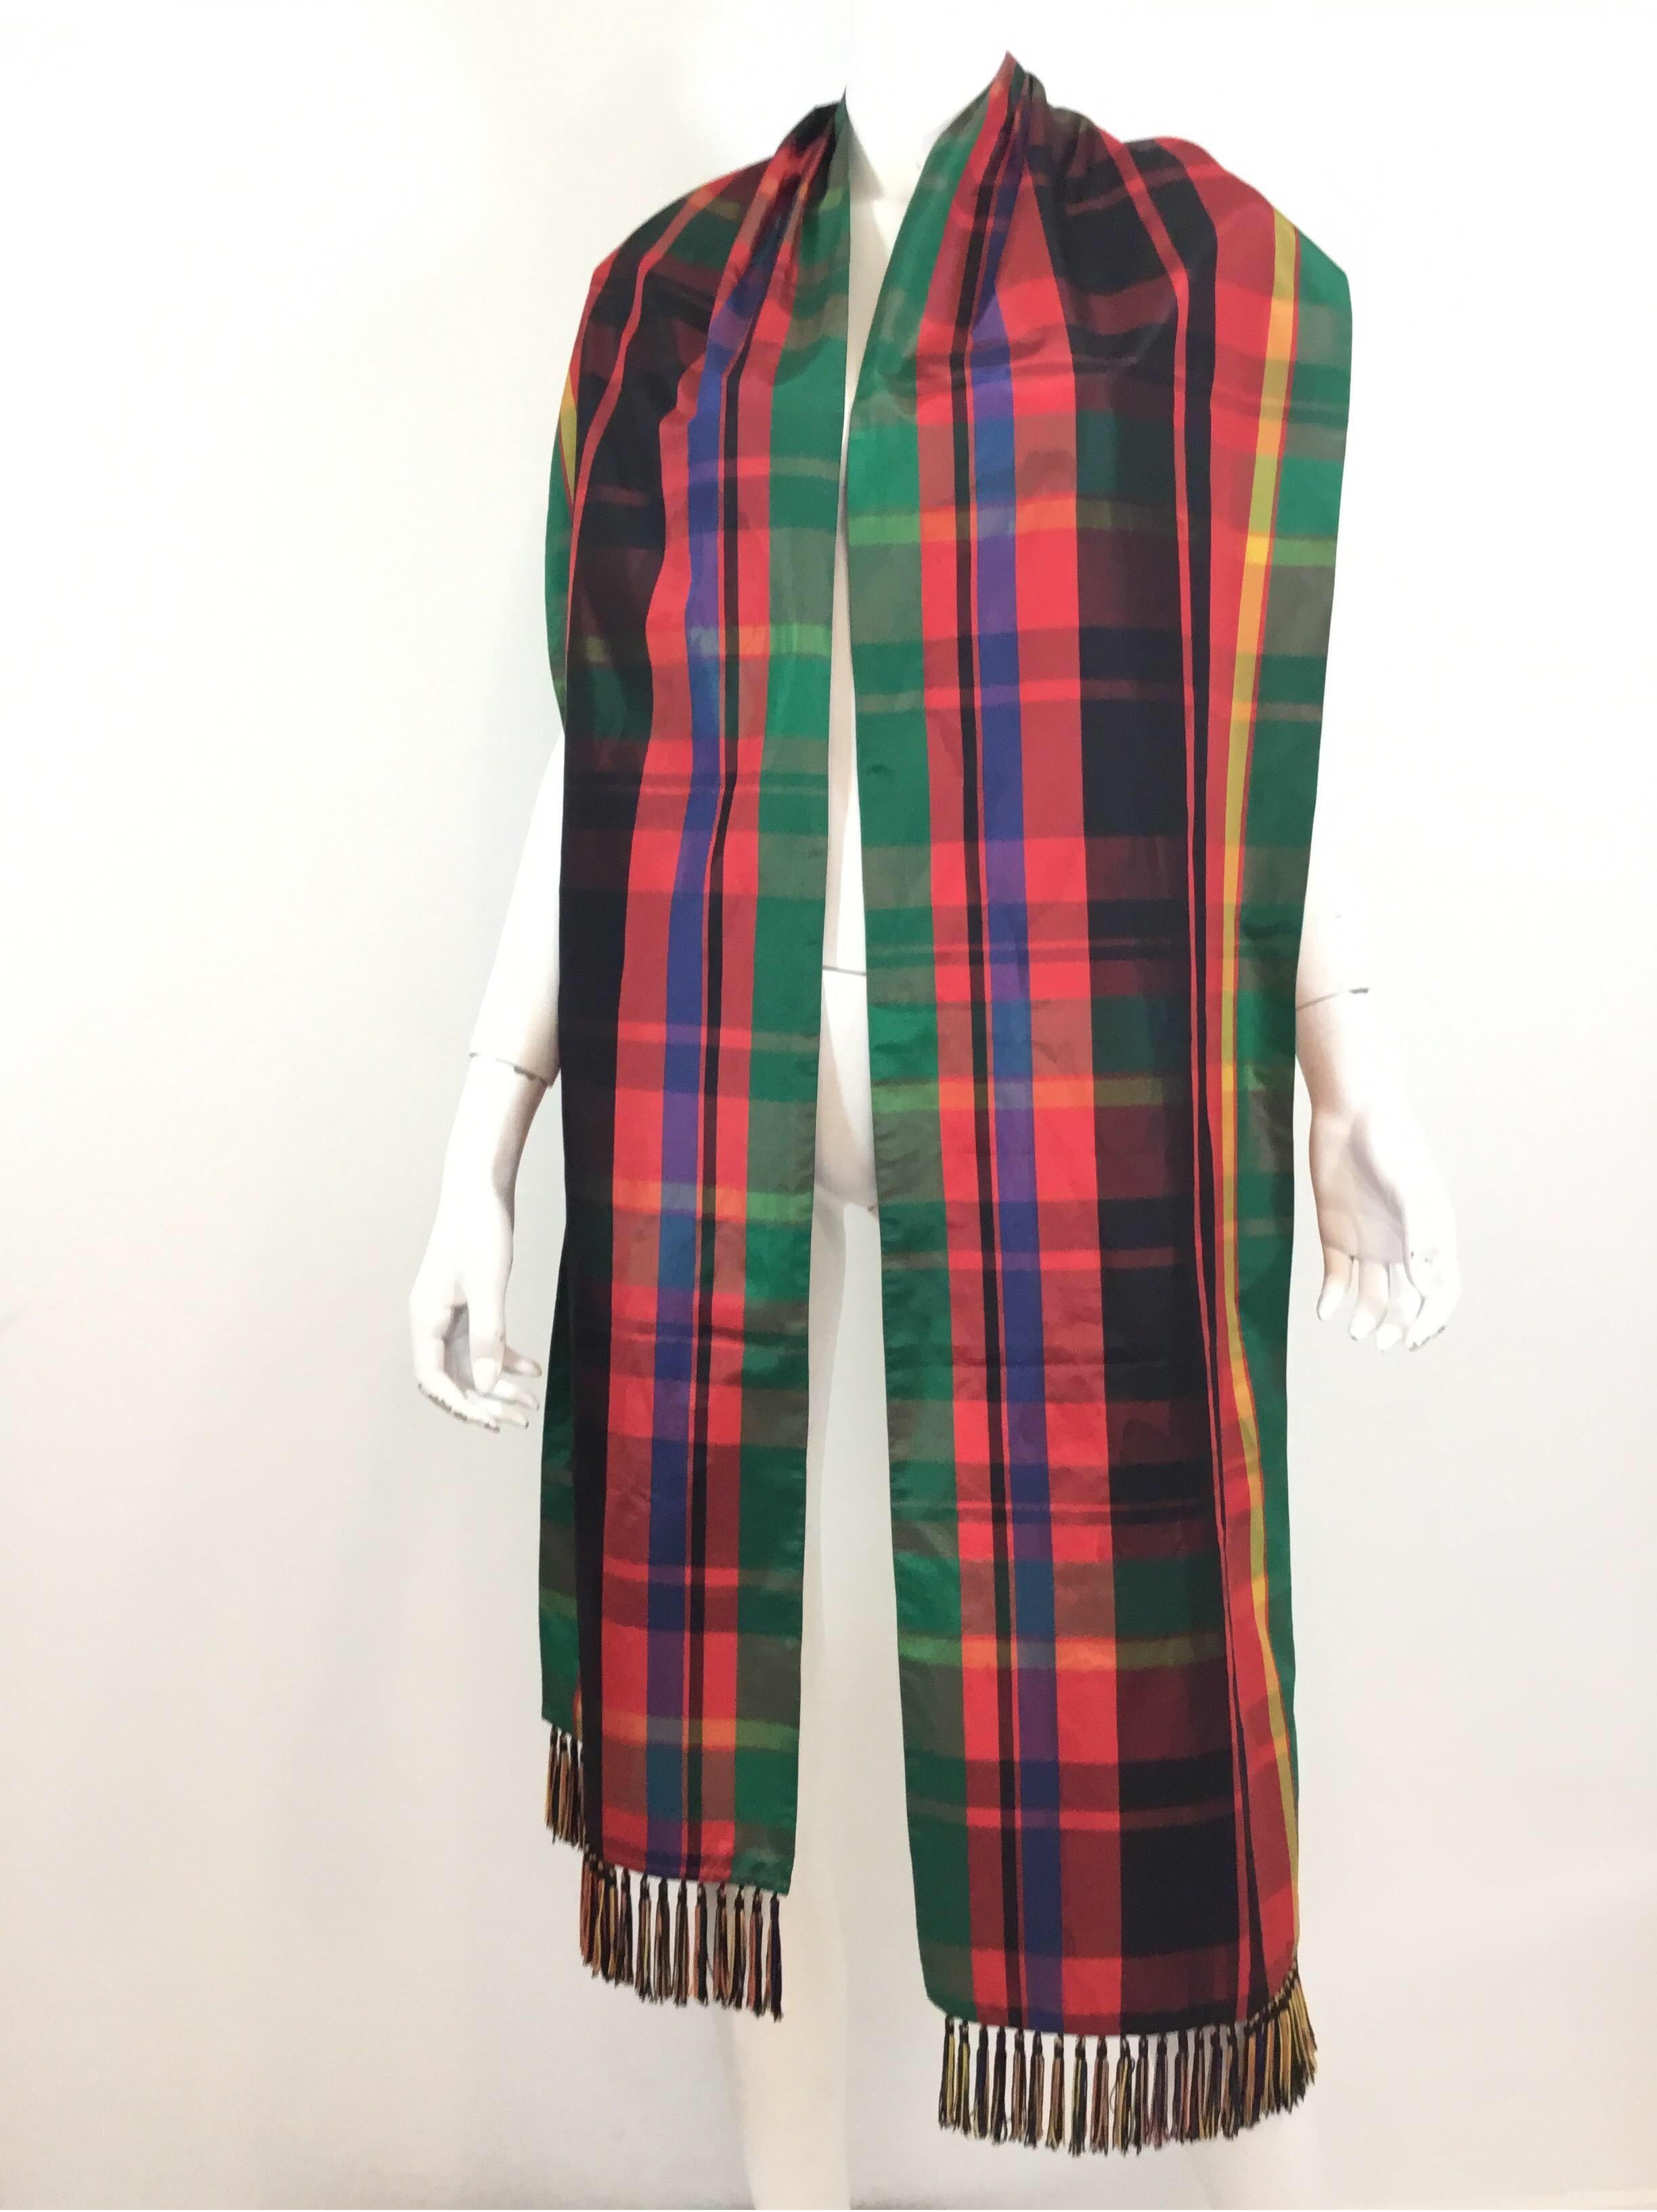 Yves Saint Laurent Vintage scarf/shawl in a tartan pattern design, taffeta fabric with fringed ends. 100in. Long, 13in. wide. Made in France. Some water spots on the taffeta fabric as pictured.